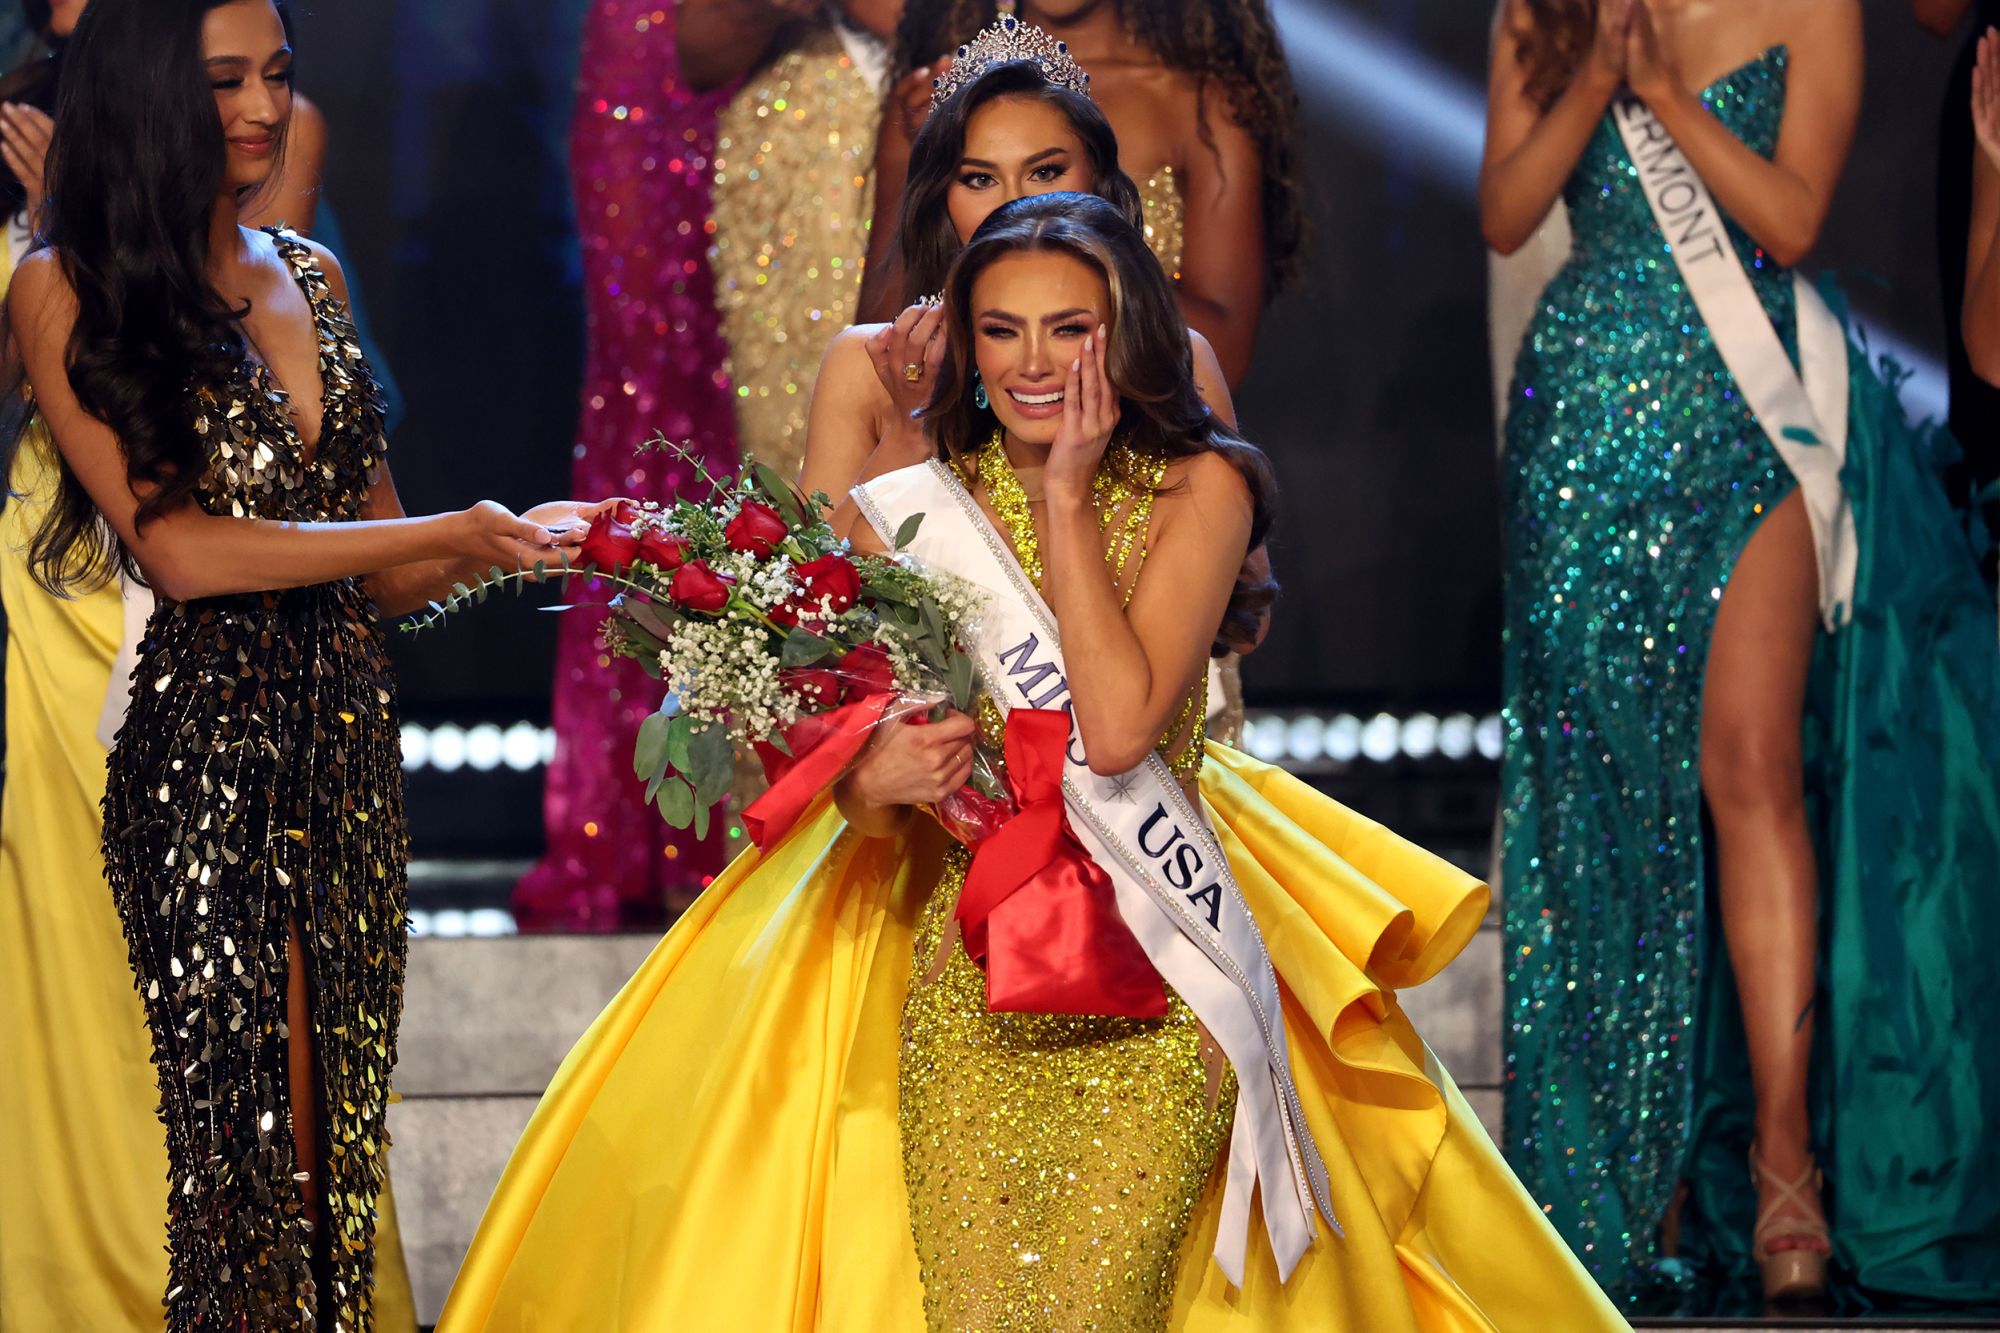 A tearful Noelia Voigt, of Utah, reacts as she receives the Miss USA sash and tiara, shortly after she was crowned the 2023 Miss USA during the televised pageant on September 29.